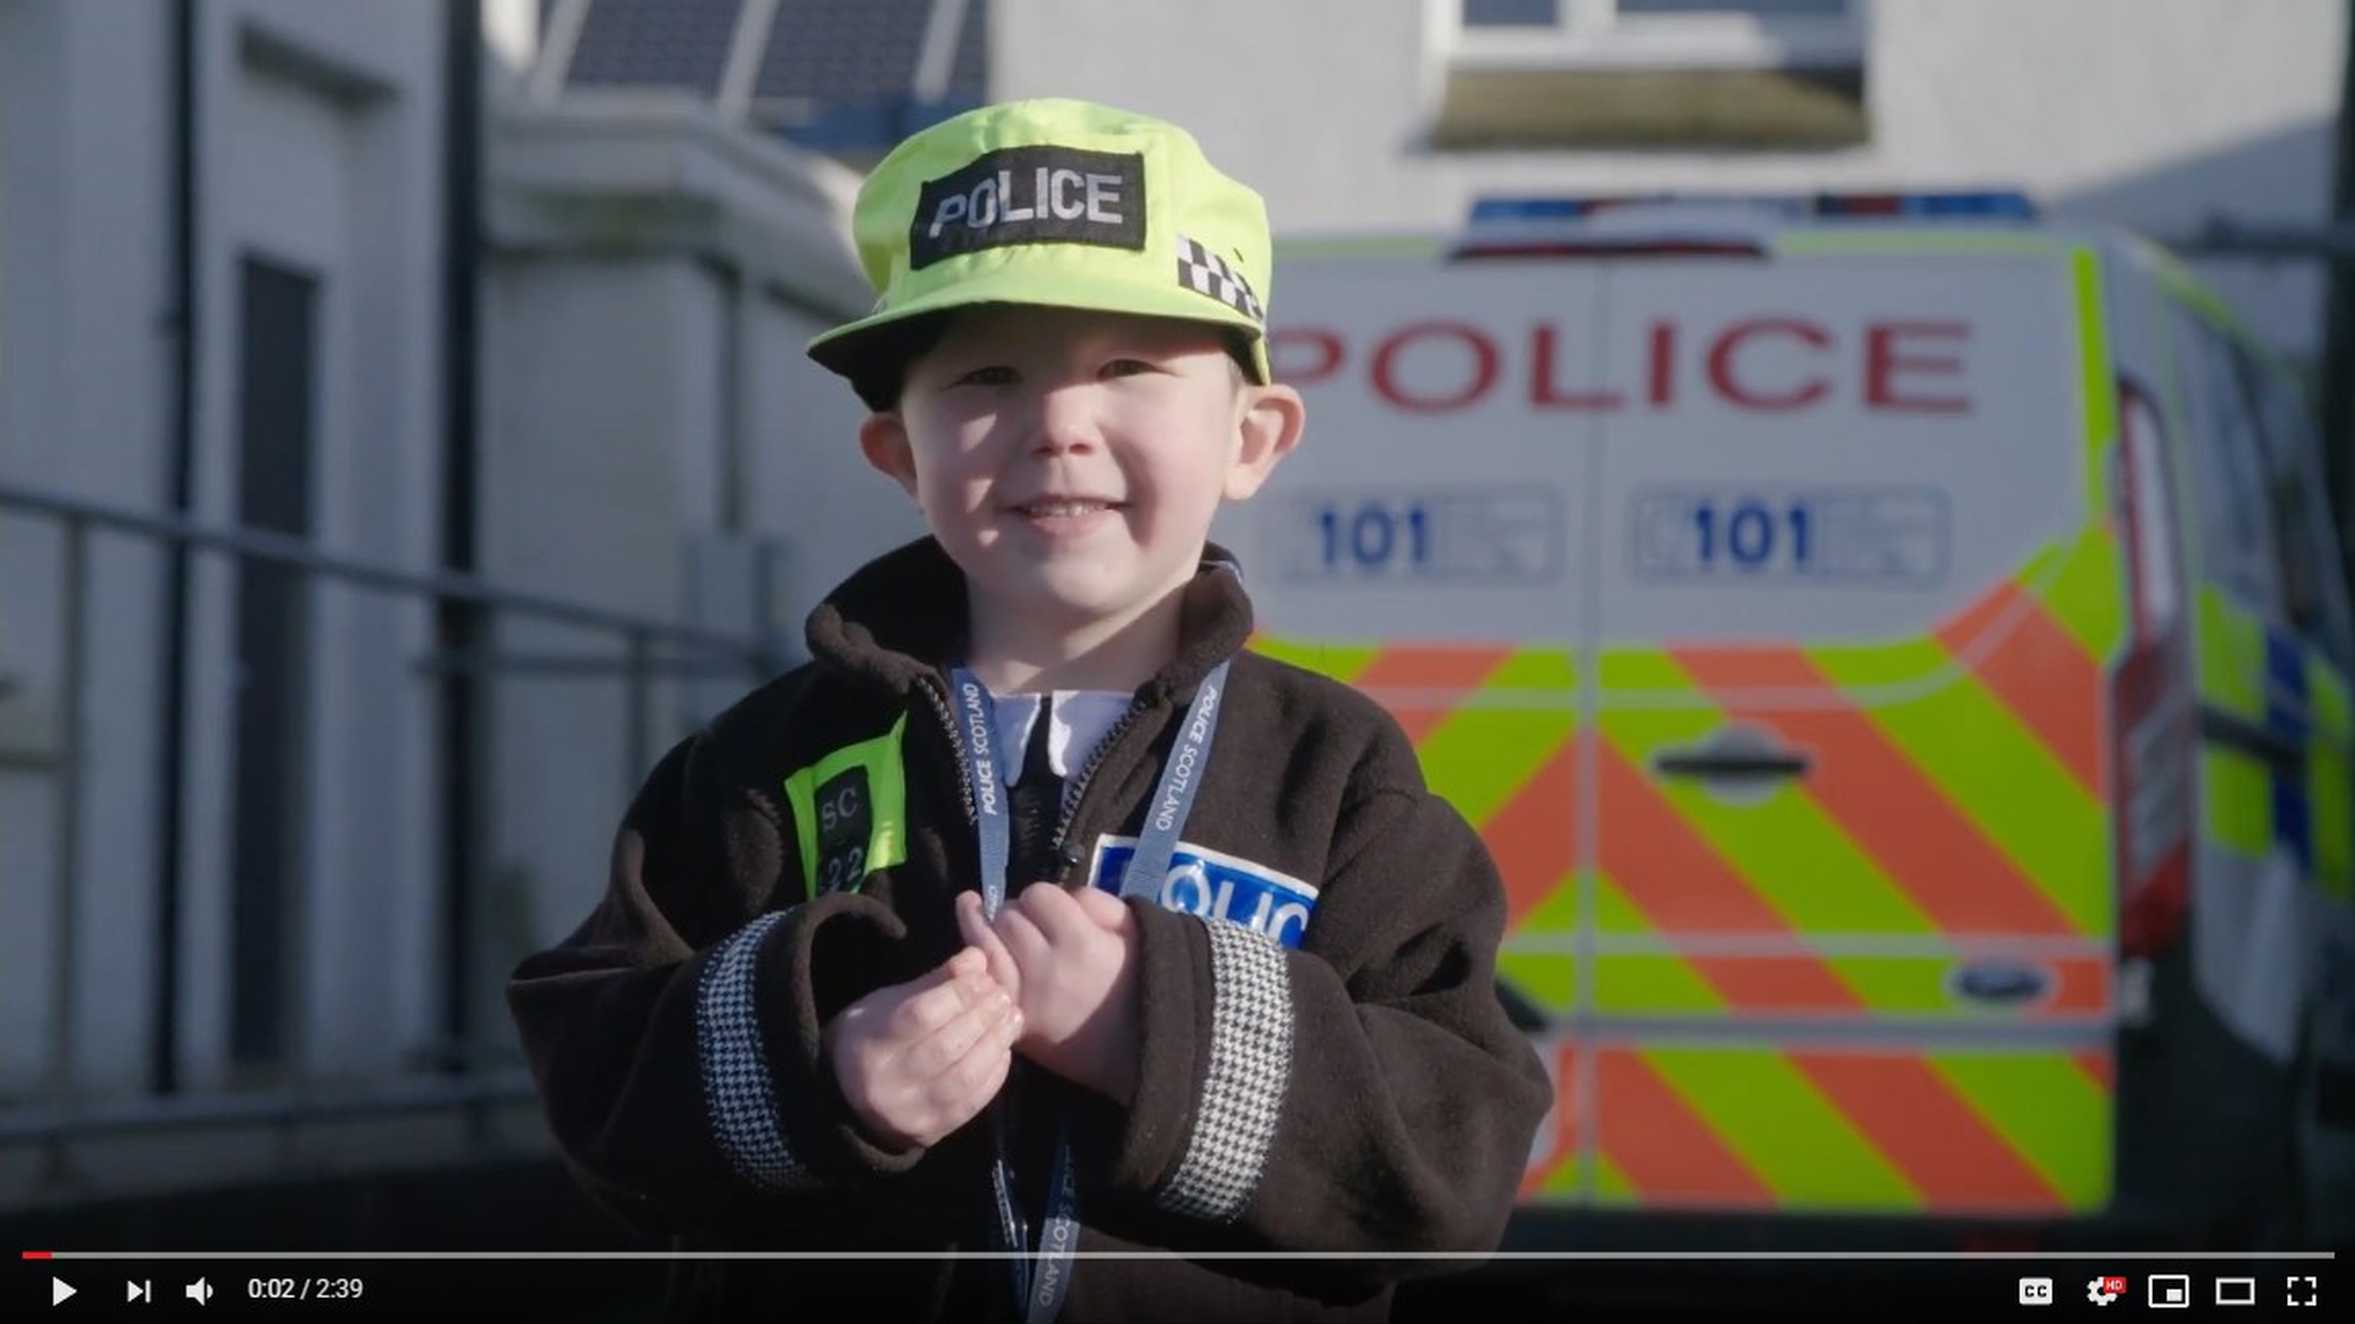 Wish child, Scott in his police uniform with a police van in background.